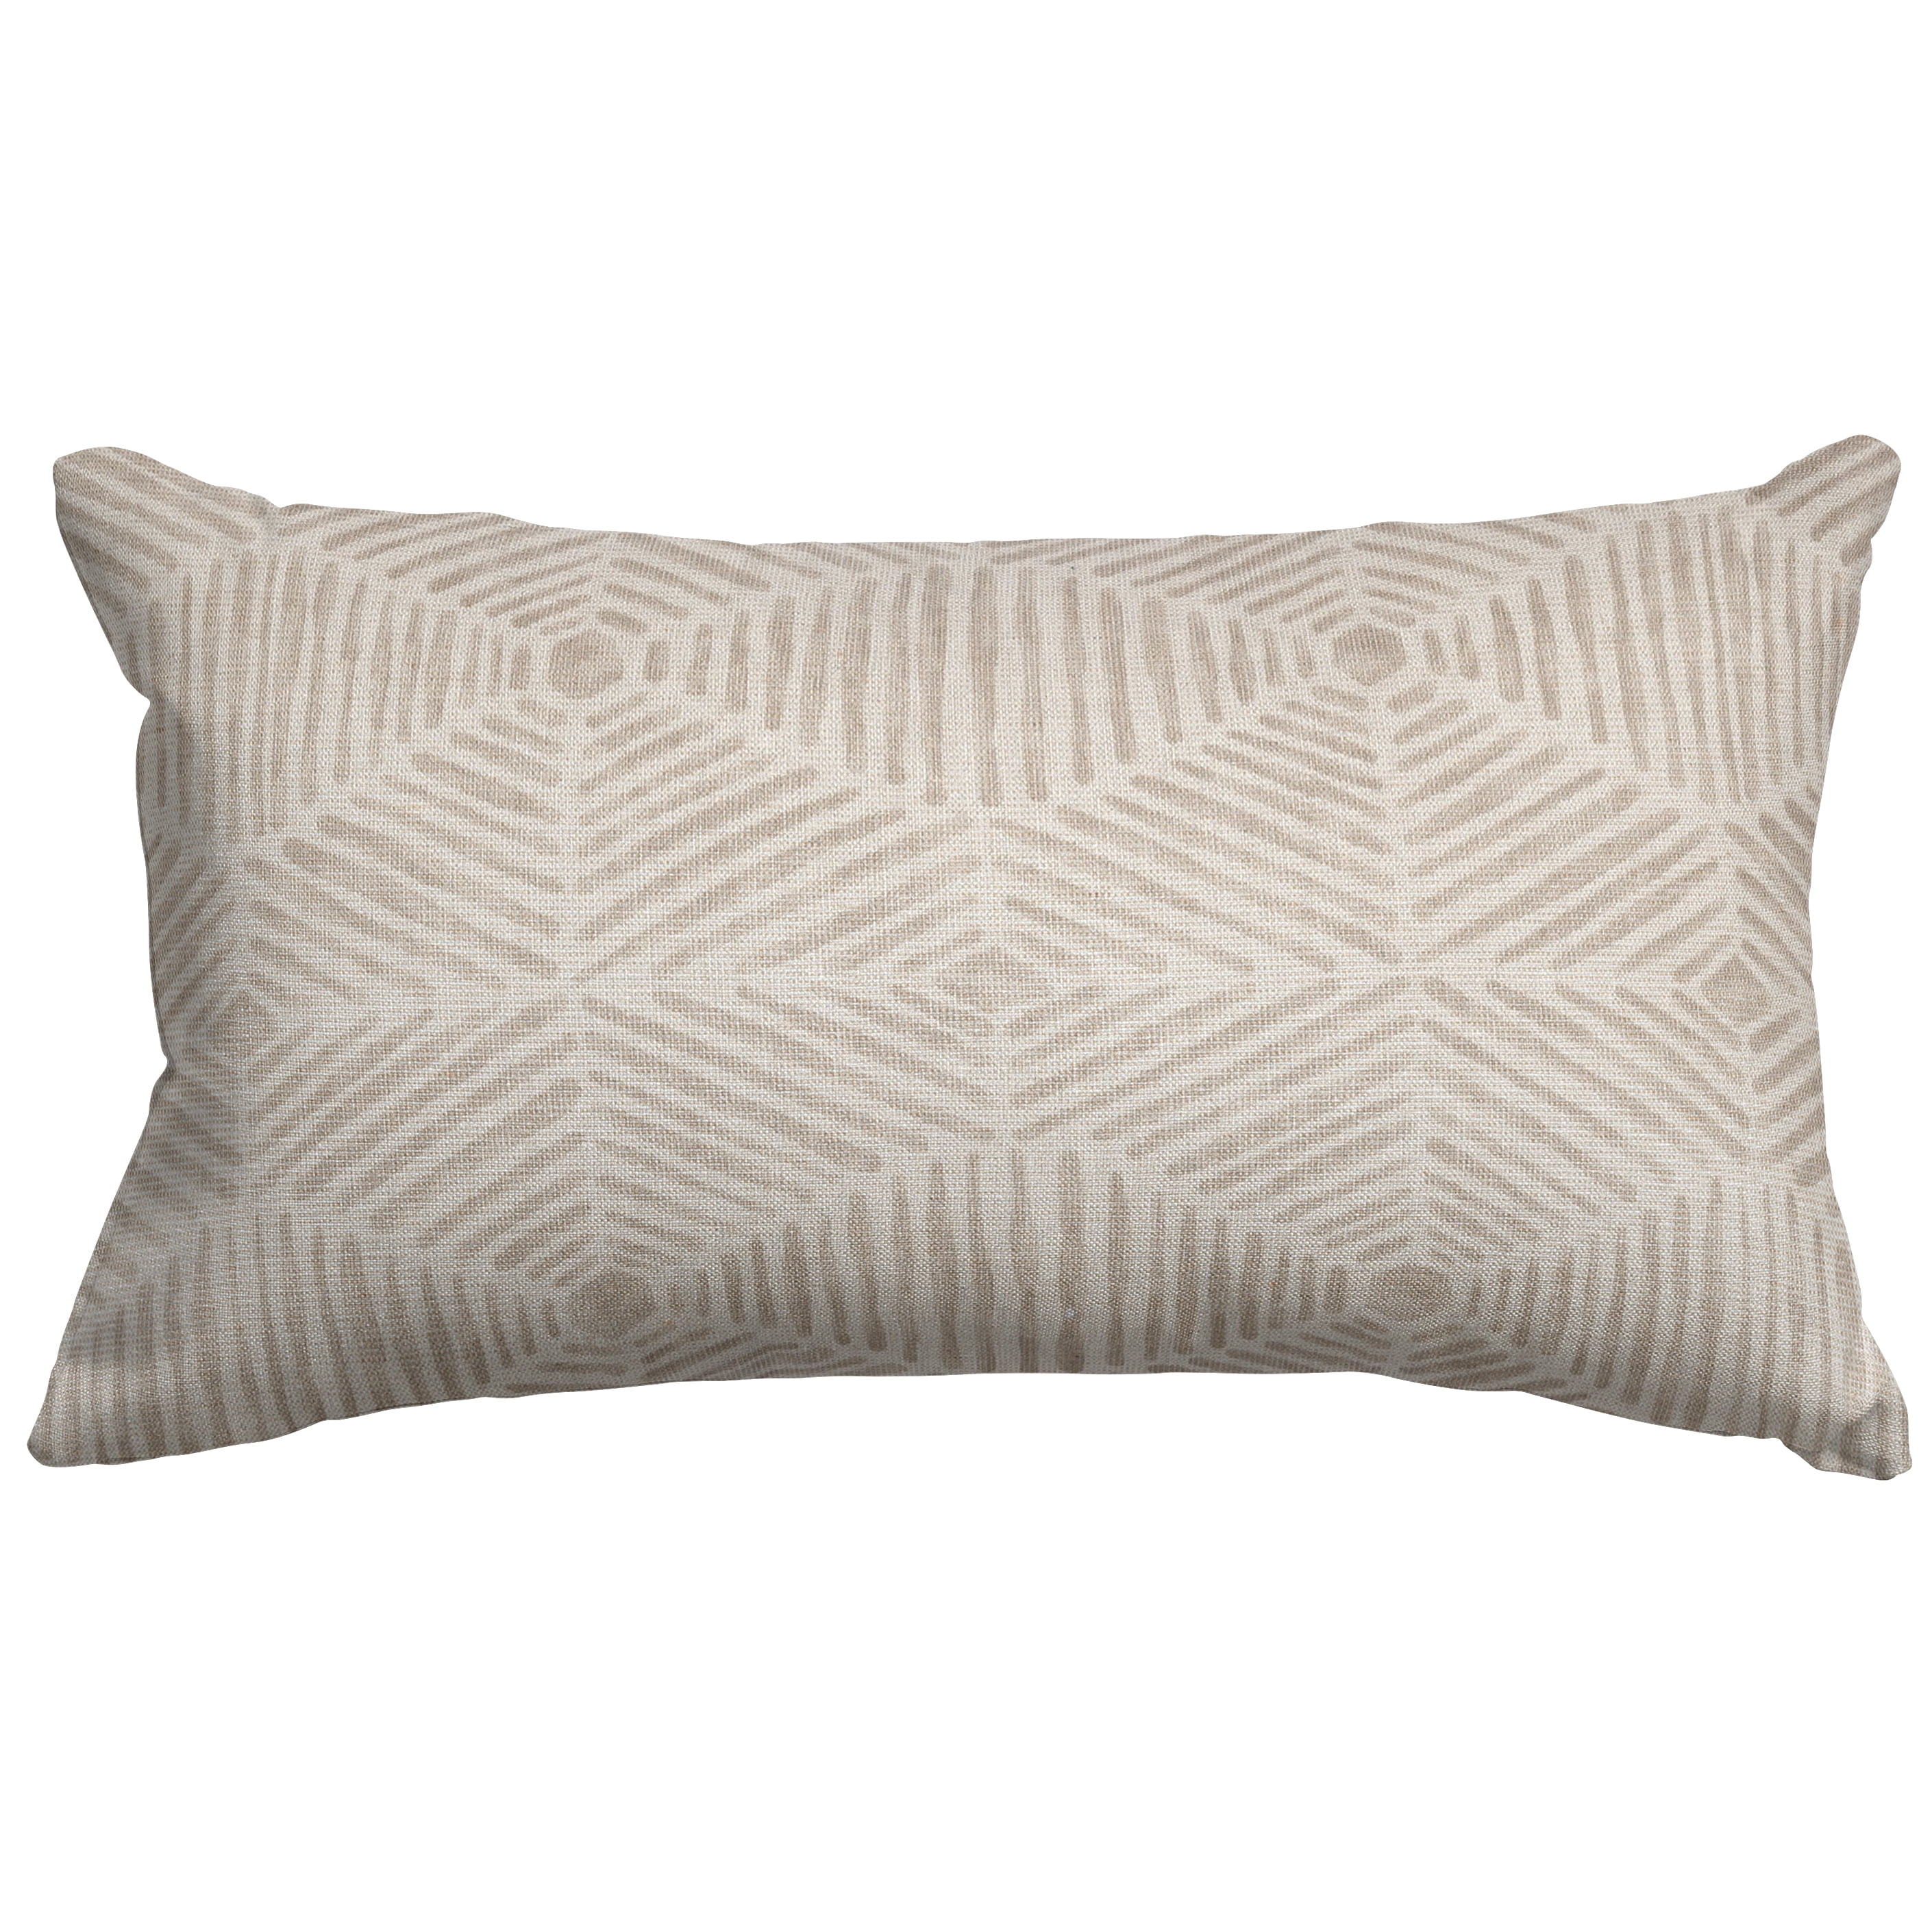 Majestic Home Goods Charlie Indoor Small Decorative Throw Pillow ...